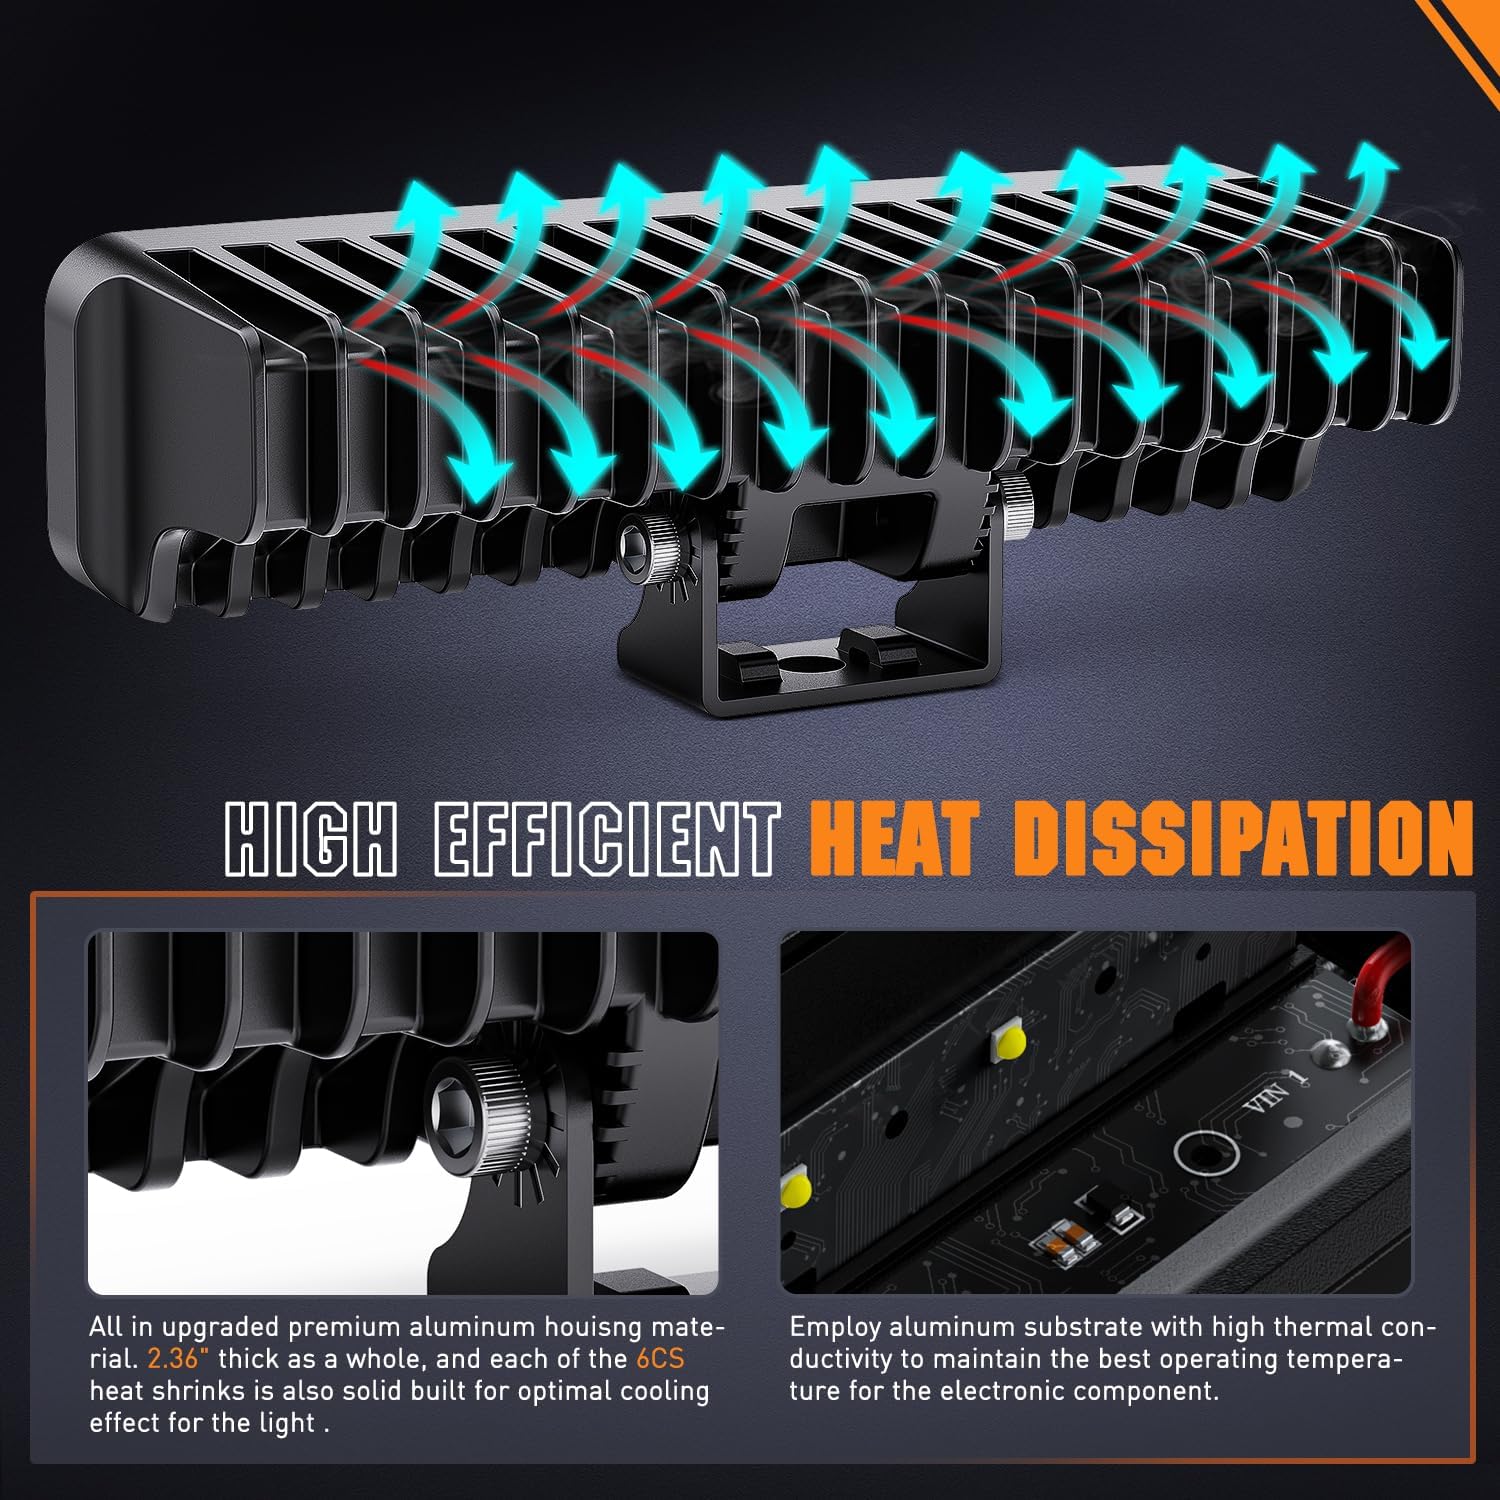 6.5" 30W 3250LM Spot LED Light Bars (Pair) | 16AWG DT Wire Nilight